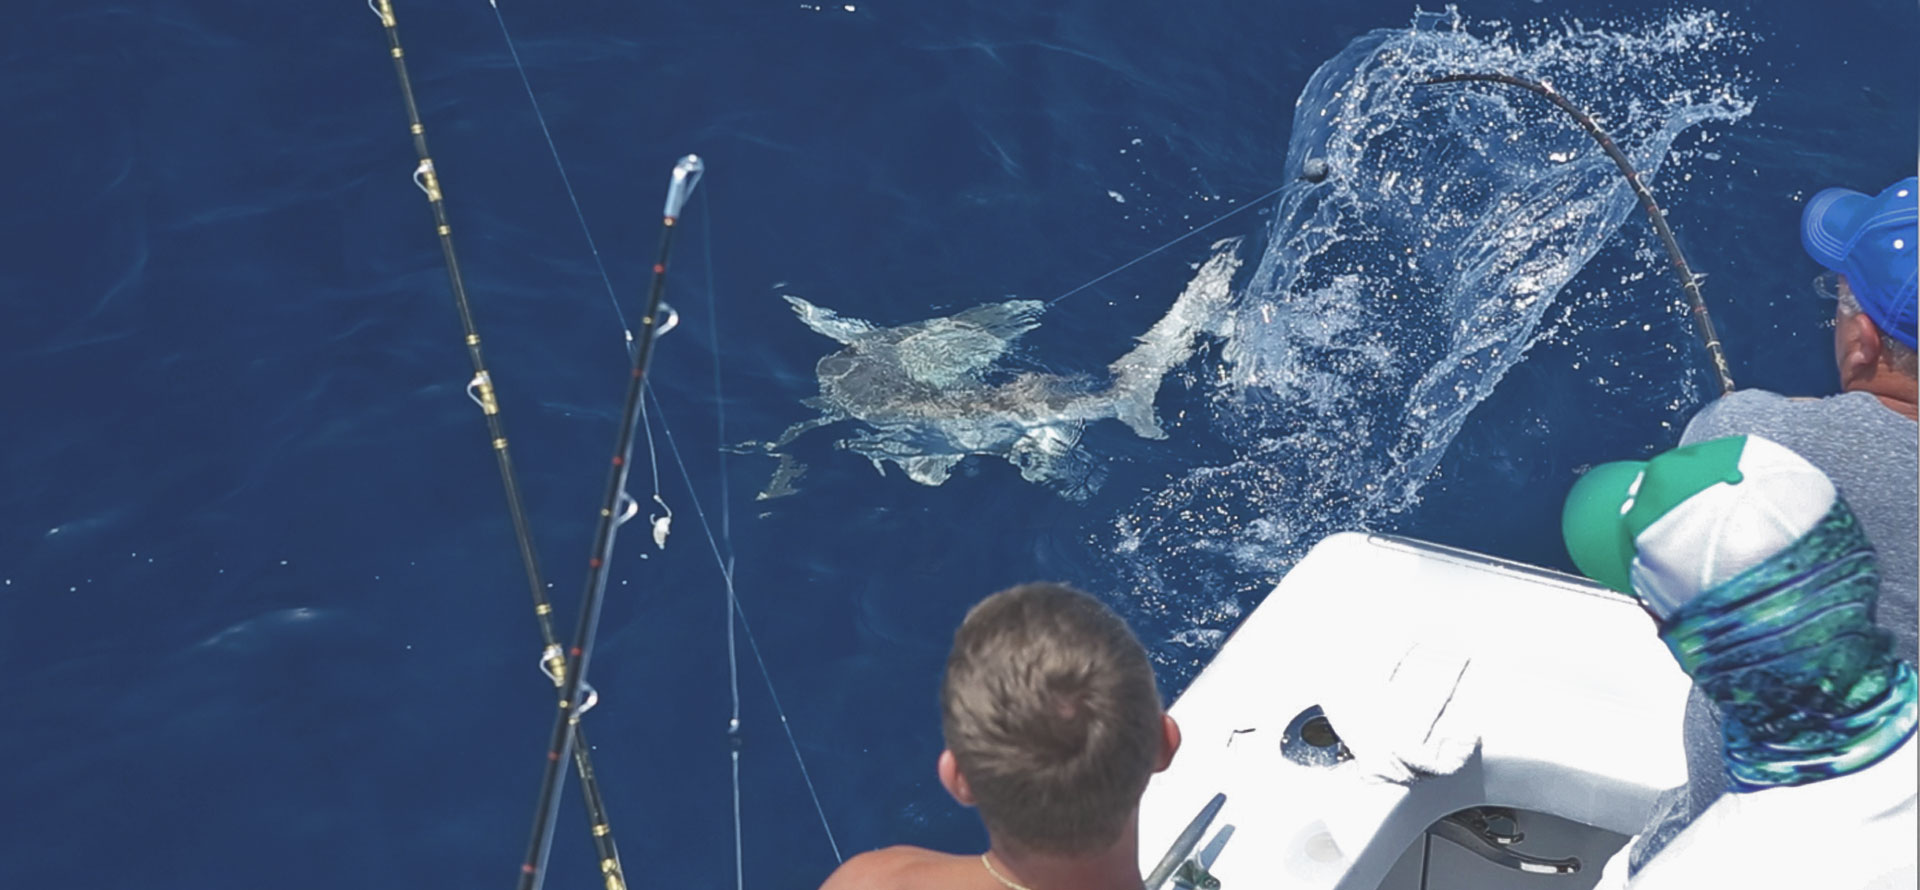 Available Fishing Charters - Book a J-Hook Fishing Charter catching sharks St Augustine FL